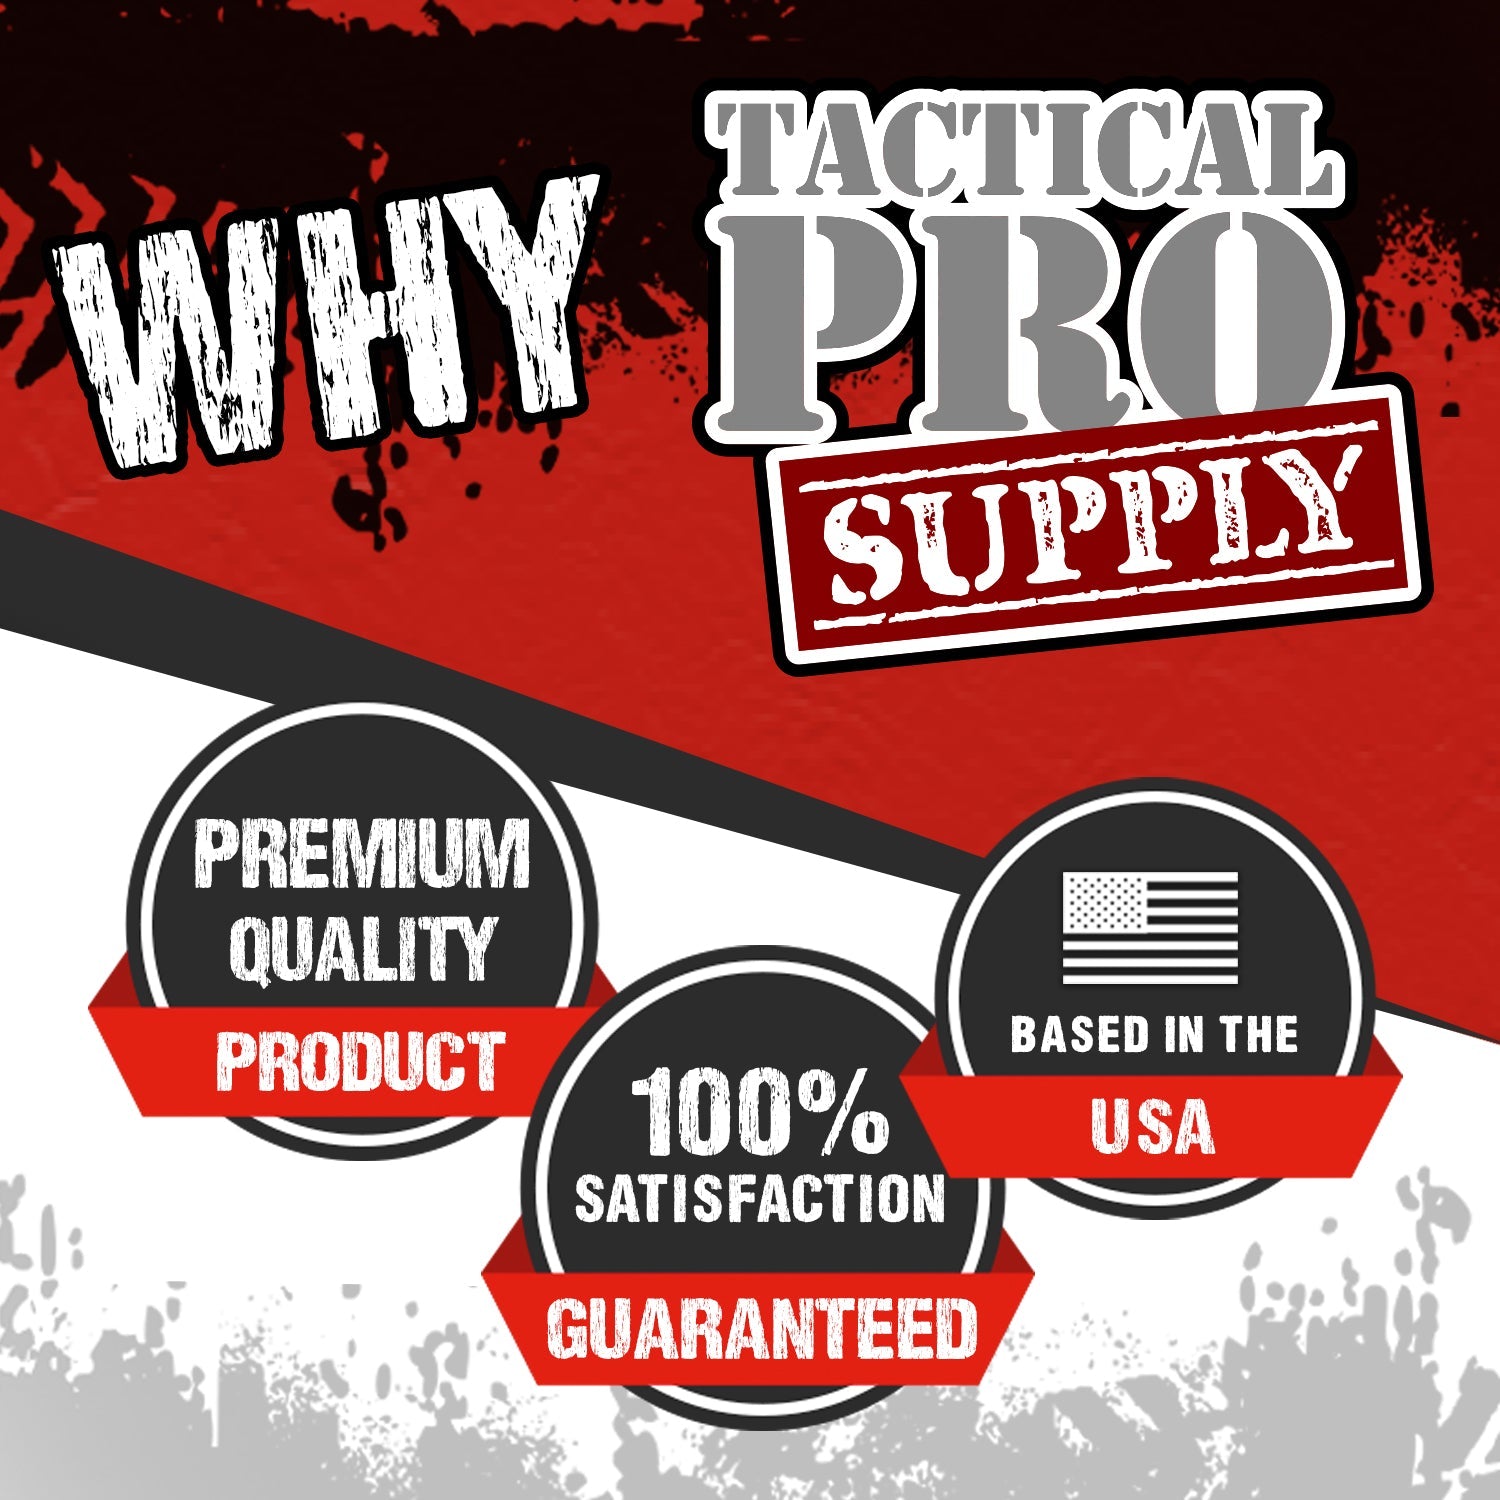 Come and Take It - Tactical Pro Supply, LLC